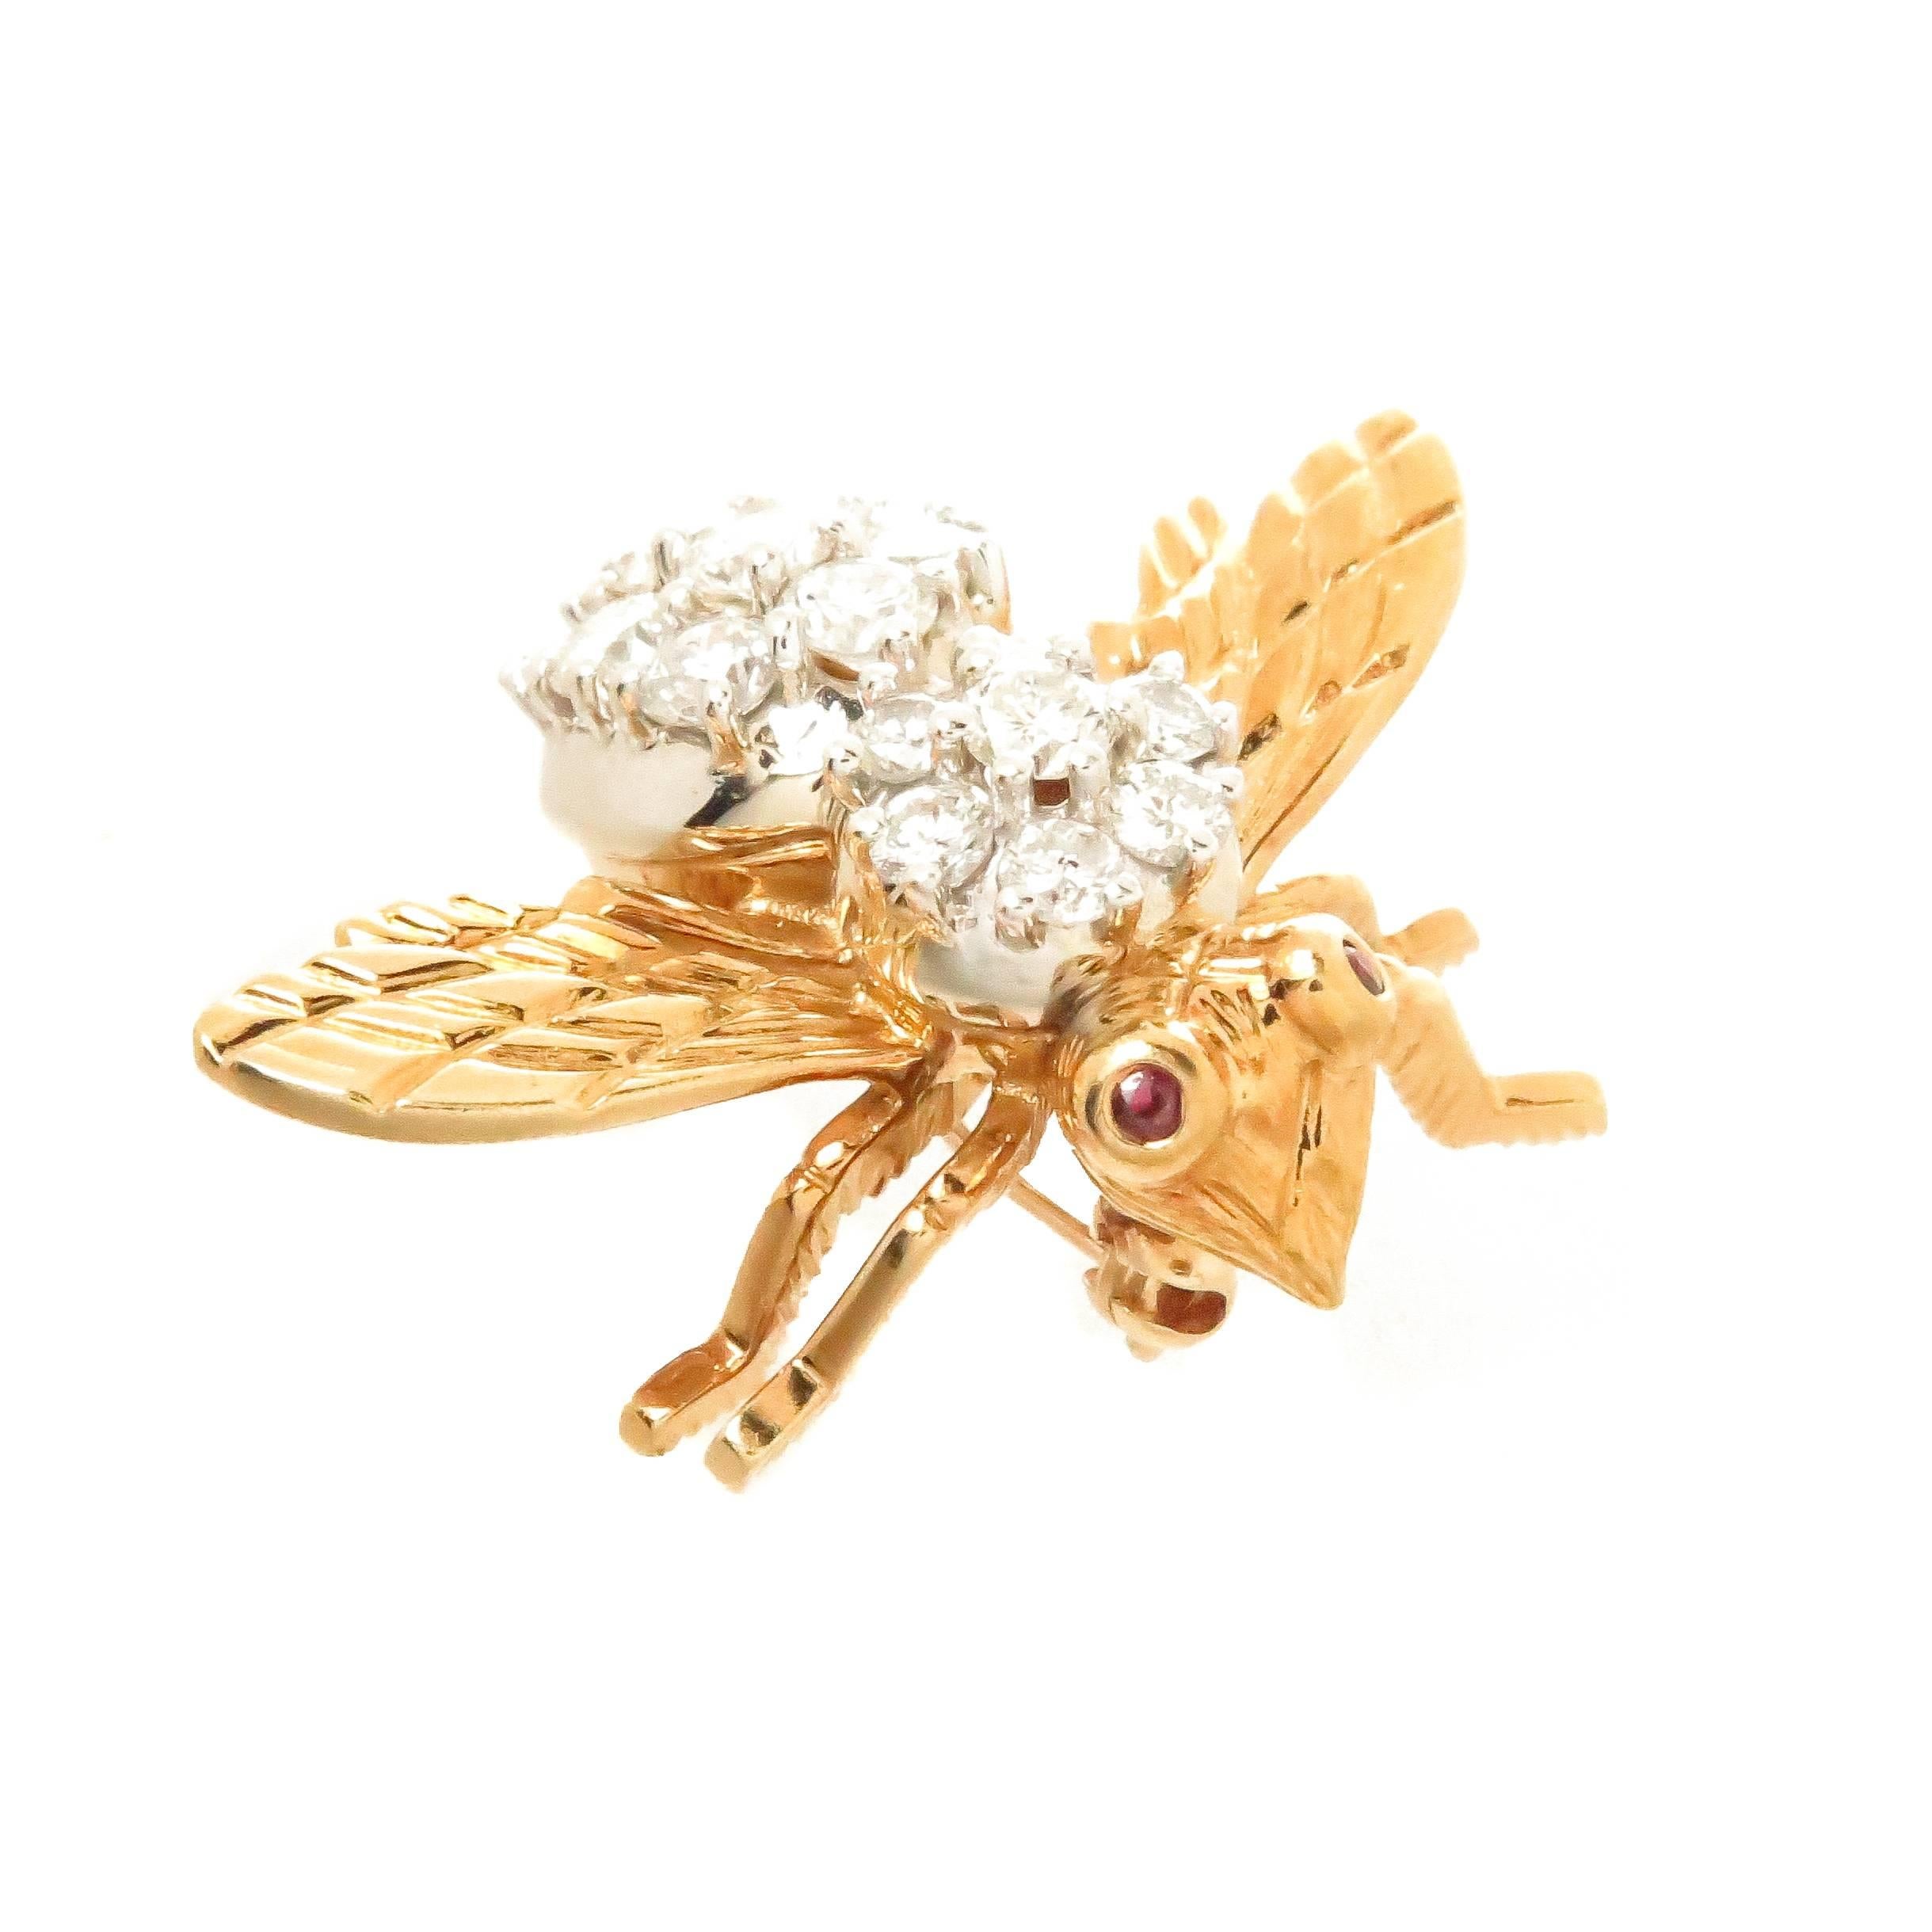 Circa 1970s Herbert Rosenthal Bee Brooch, measuring 1 inch in length and 1 3/8 inches Wing tip to tip. Set with 19 fine White Round Brilliant cut Diamonds totaling 1 carat and further set with Ruby Eyes. 